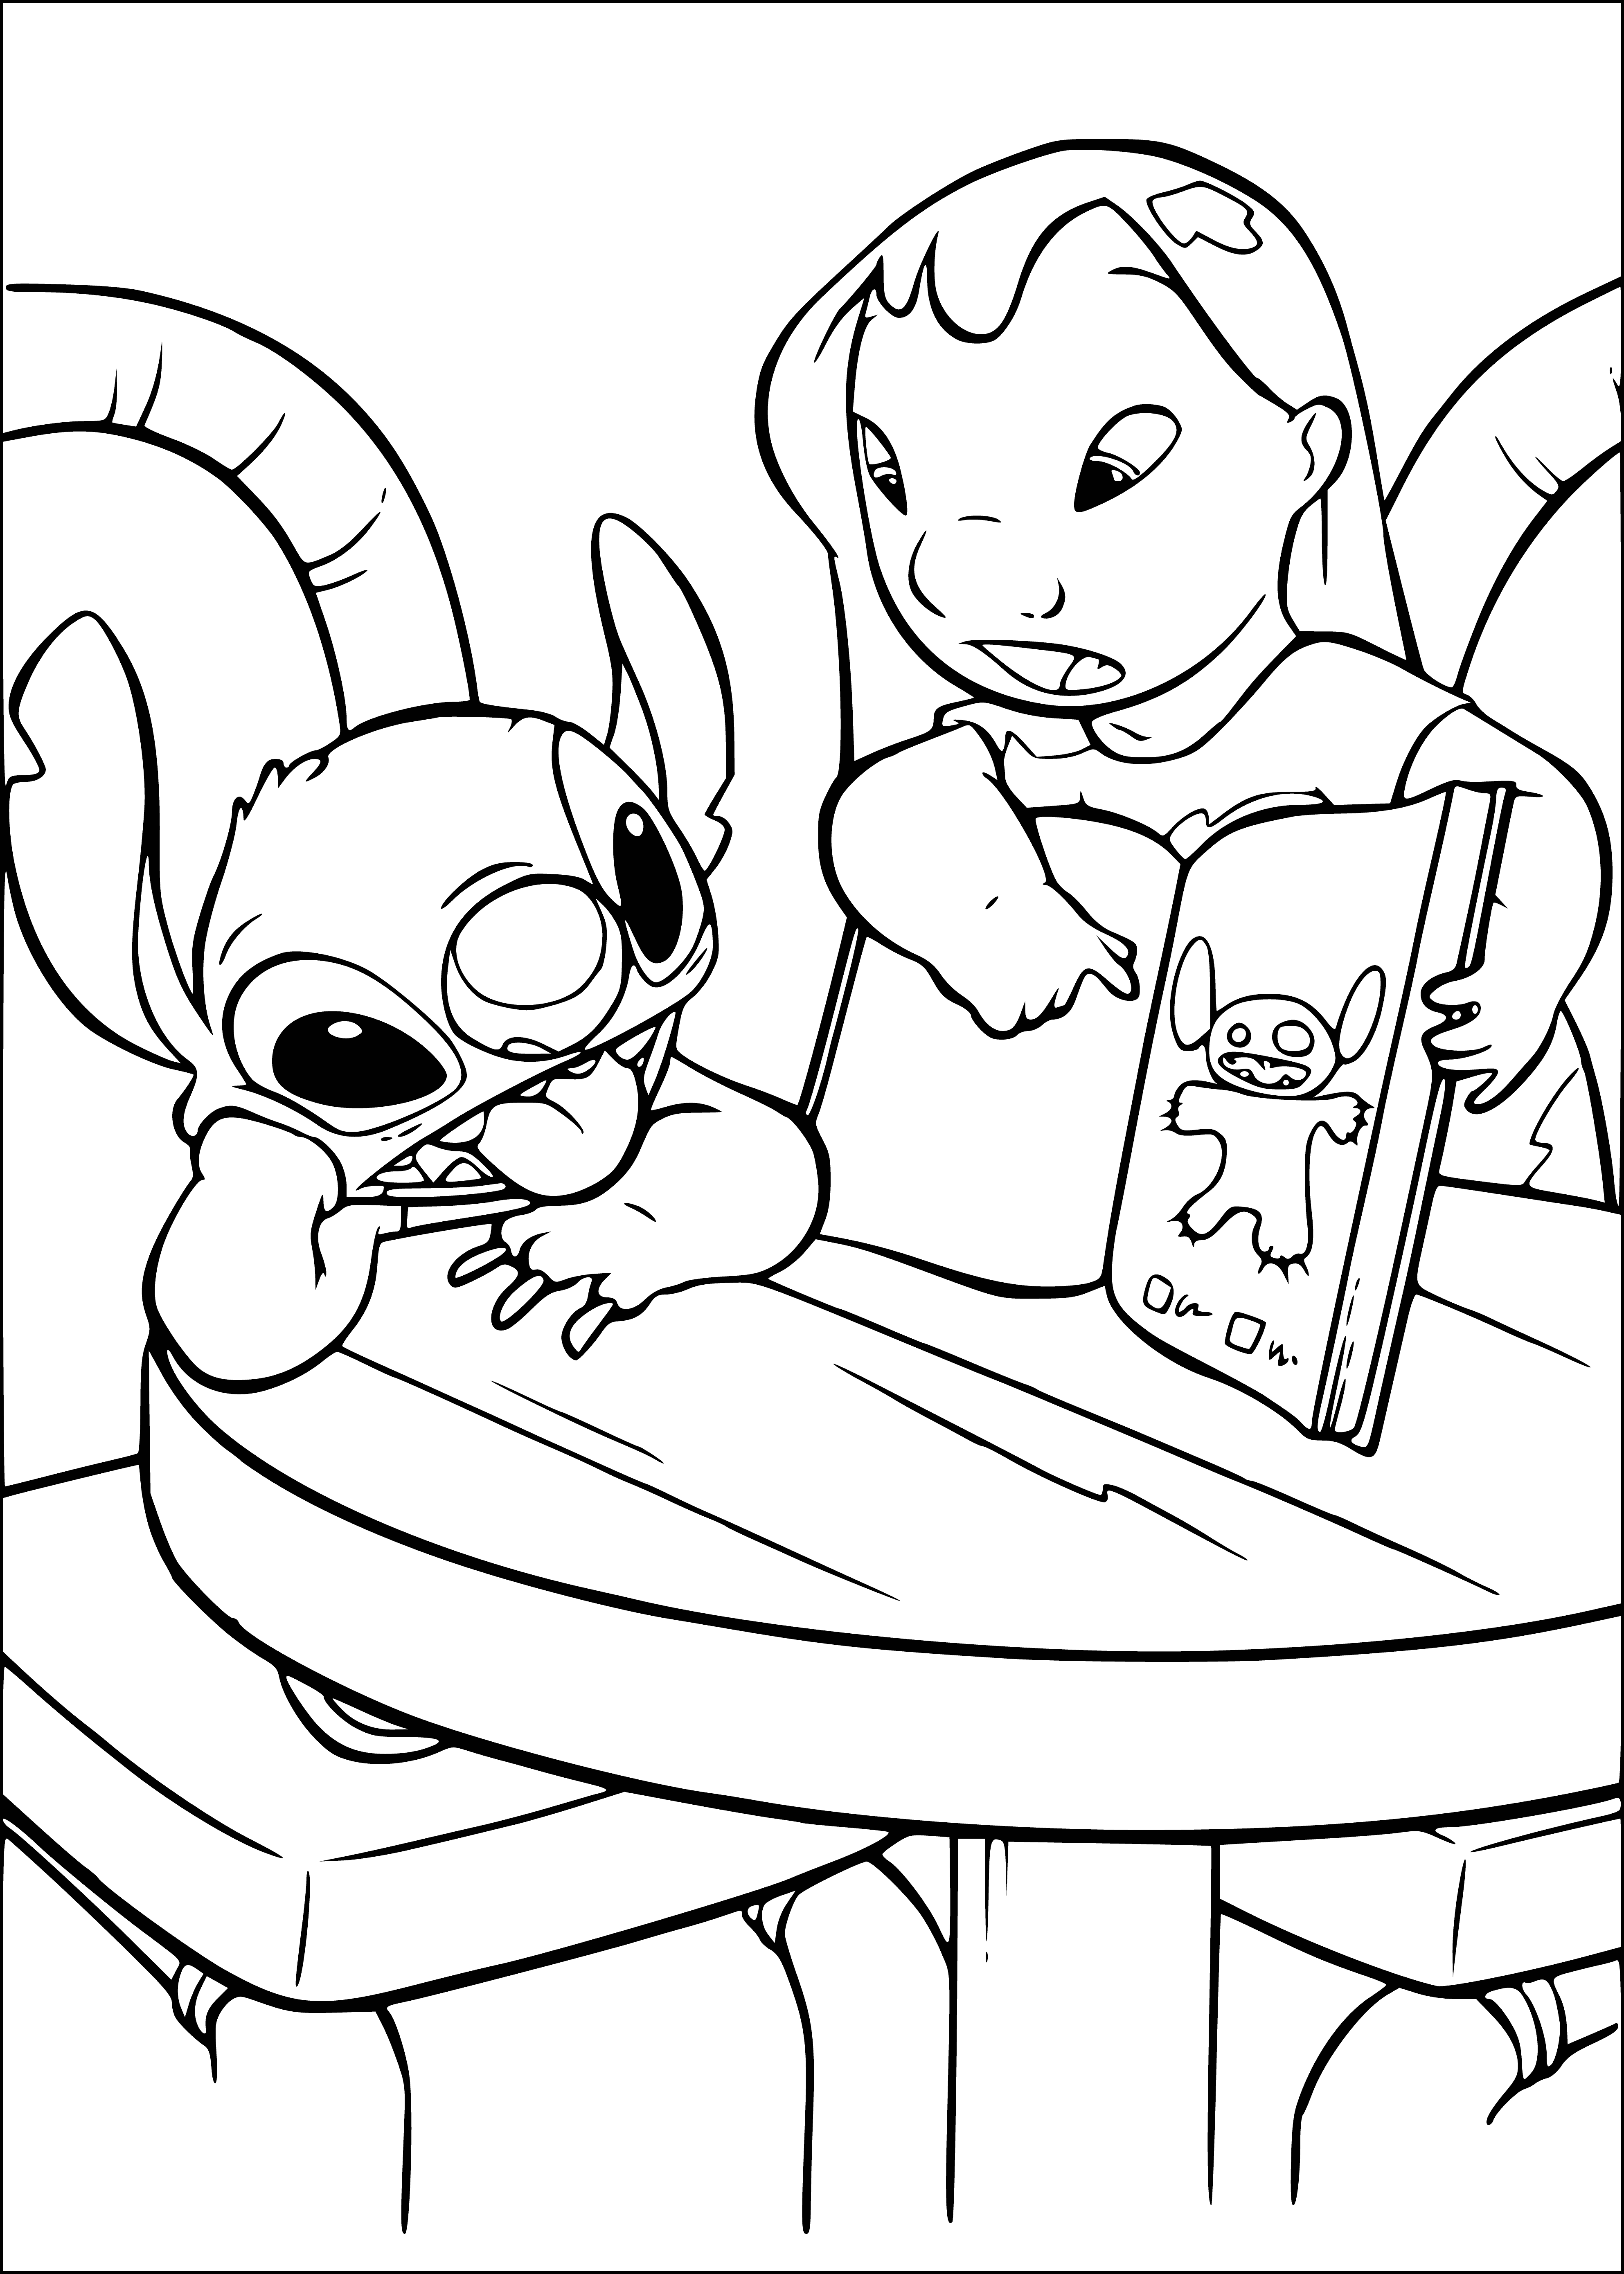 Badness level coloring page